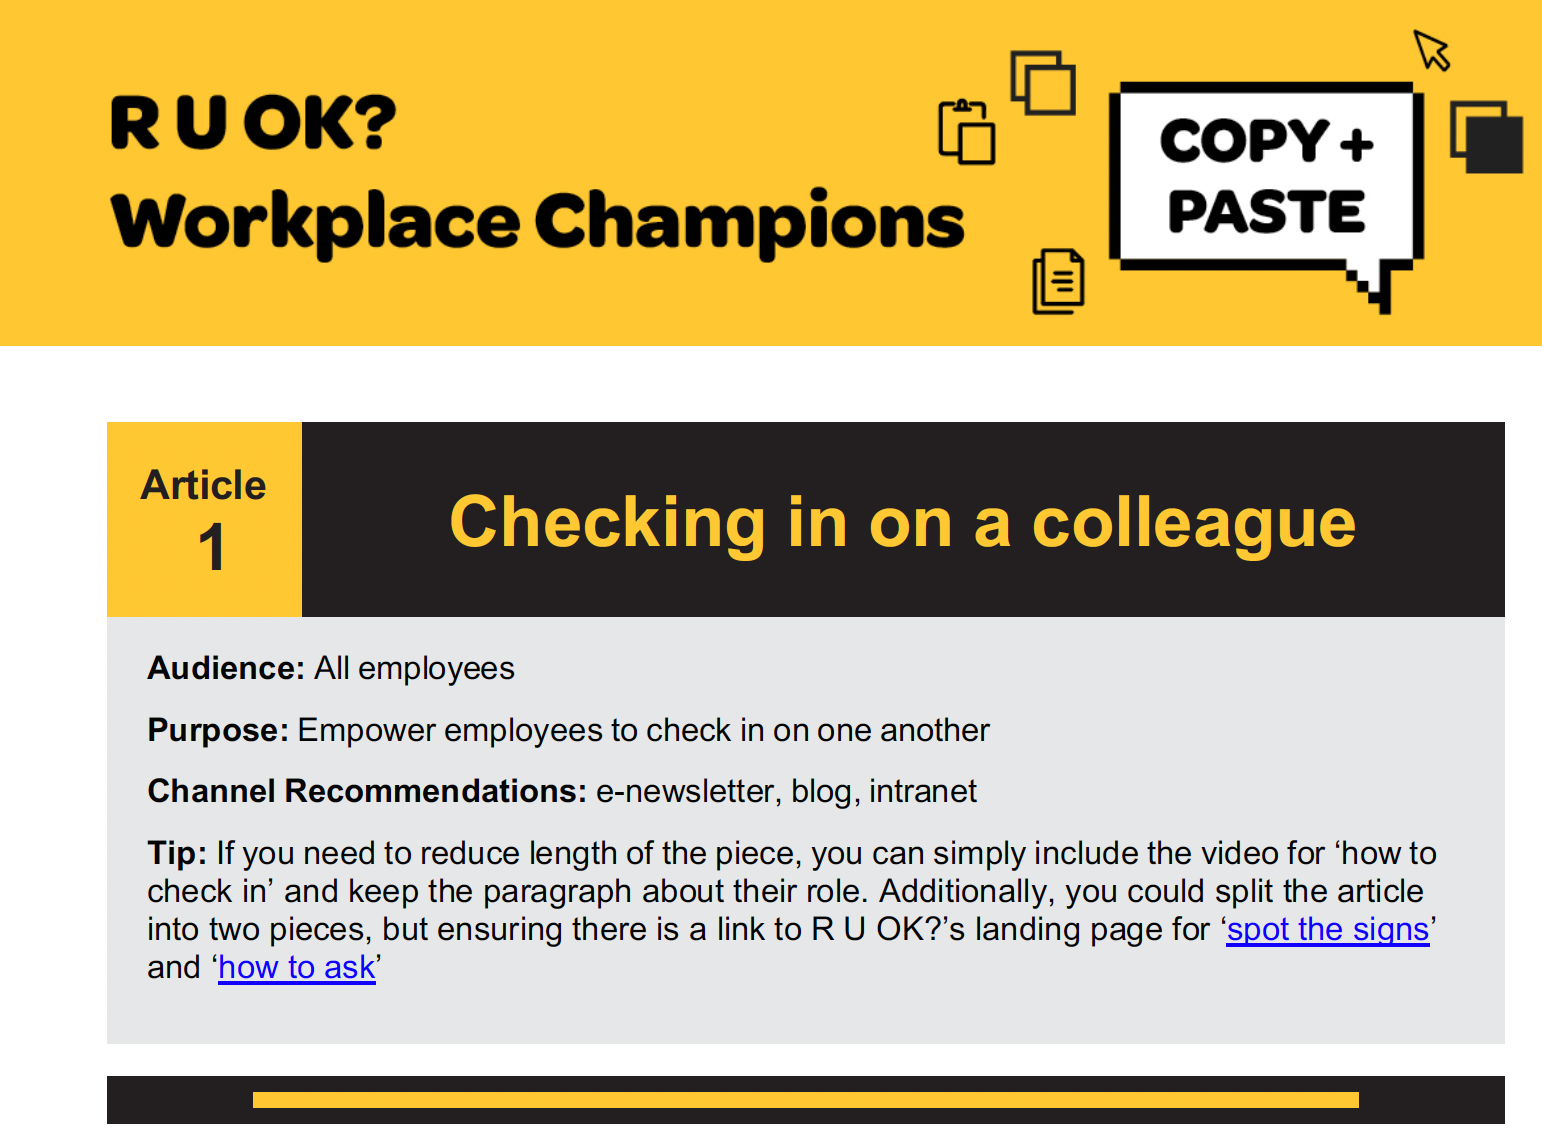 Workplace Champion Article: Checking in on a colleague